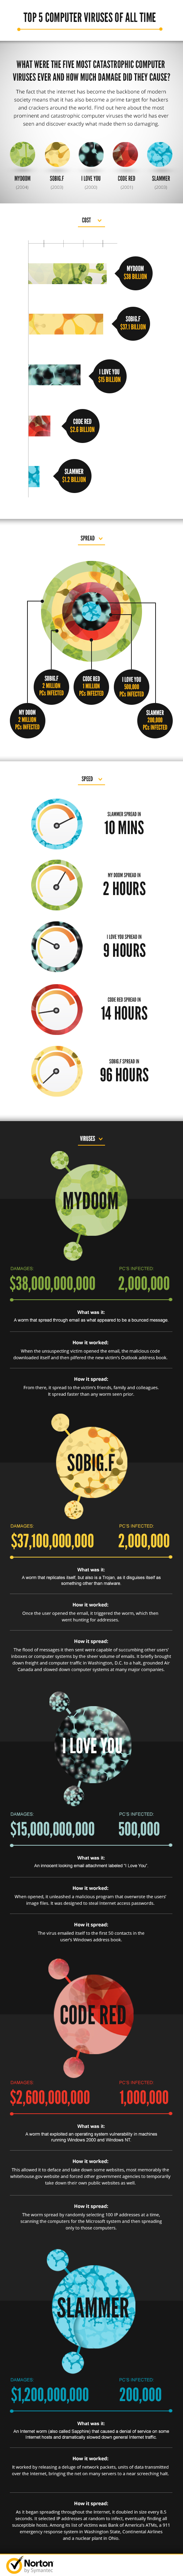 norton virus infographic Infographic: Five Most Catastrophic Viruses of All Time